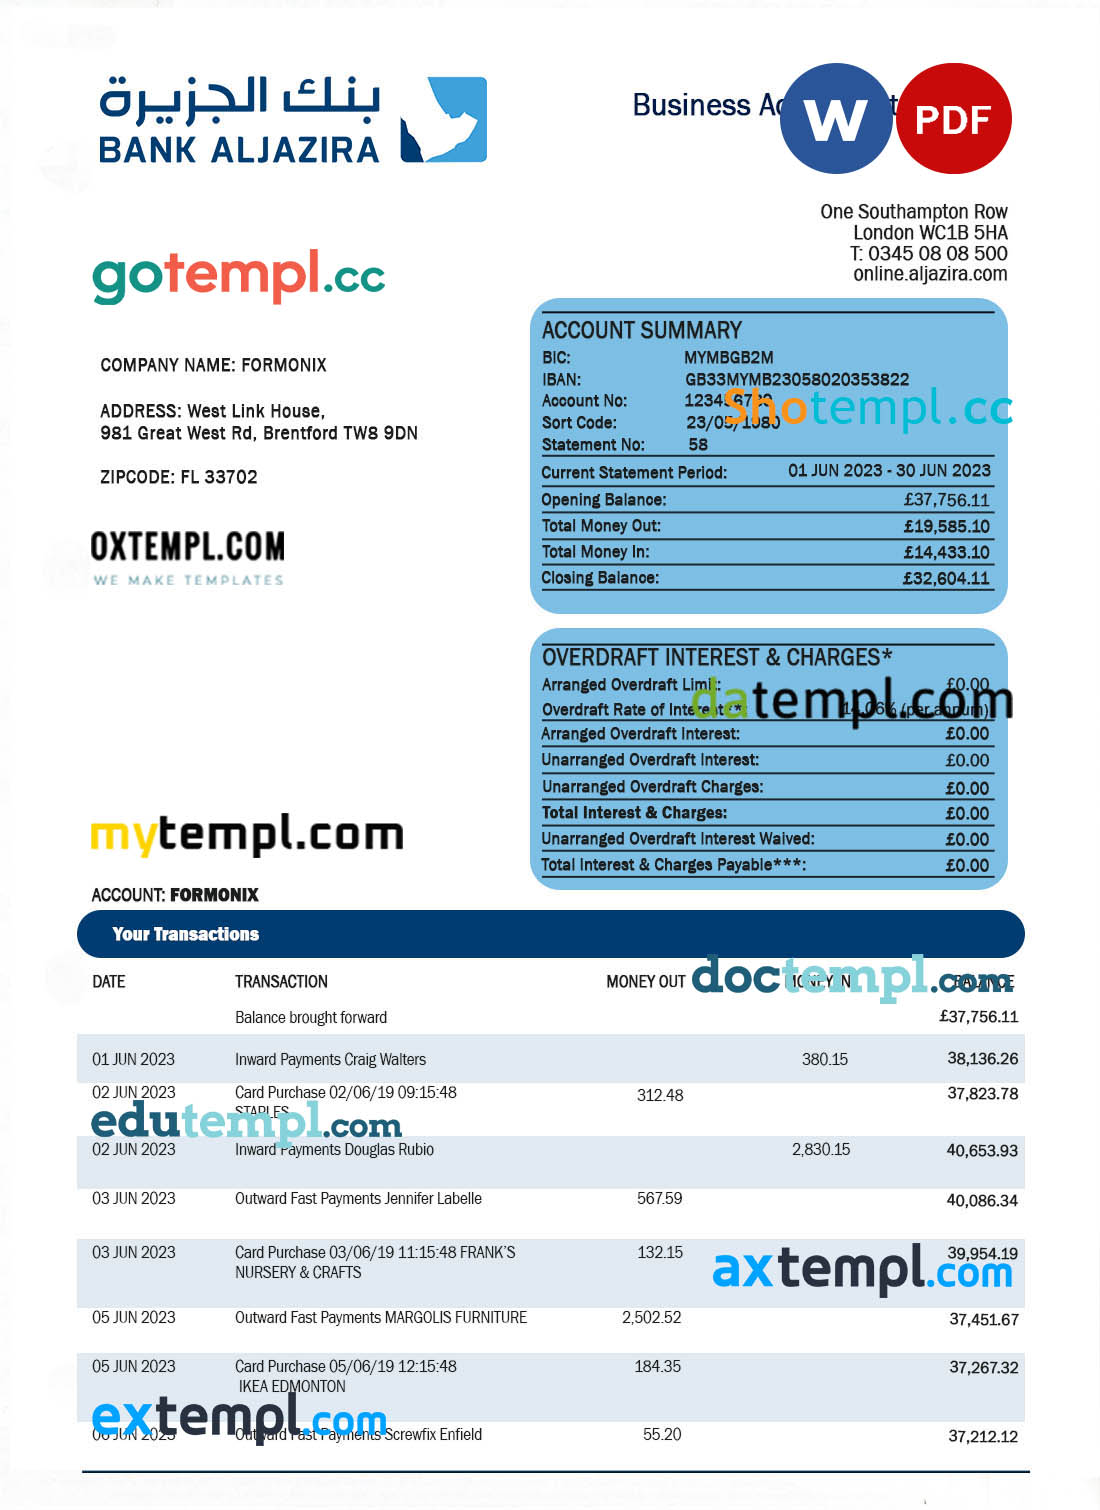 editable template, Bank AlJazira firm account statement Word and PDF template